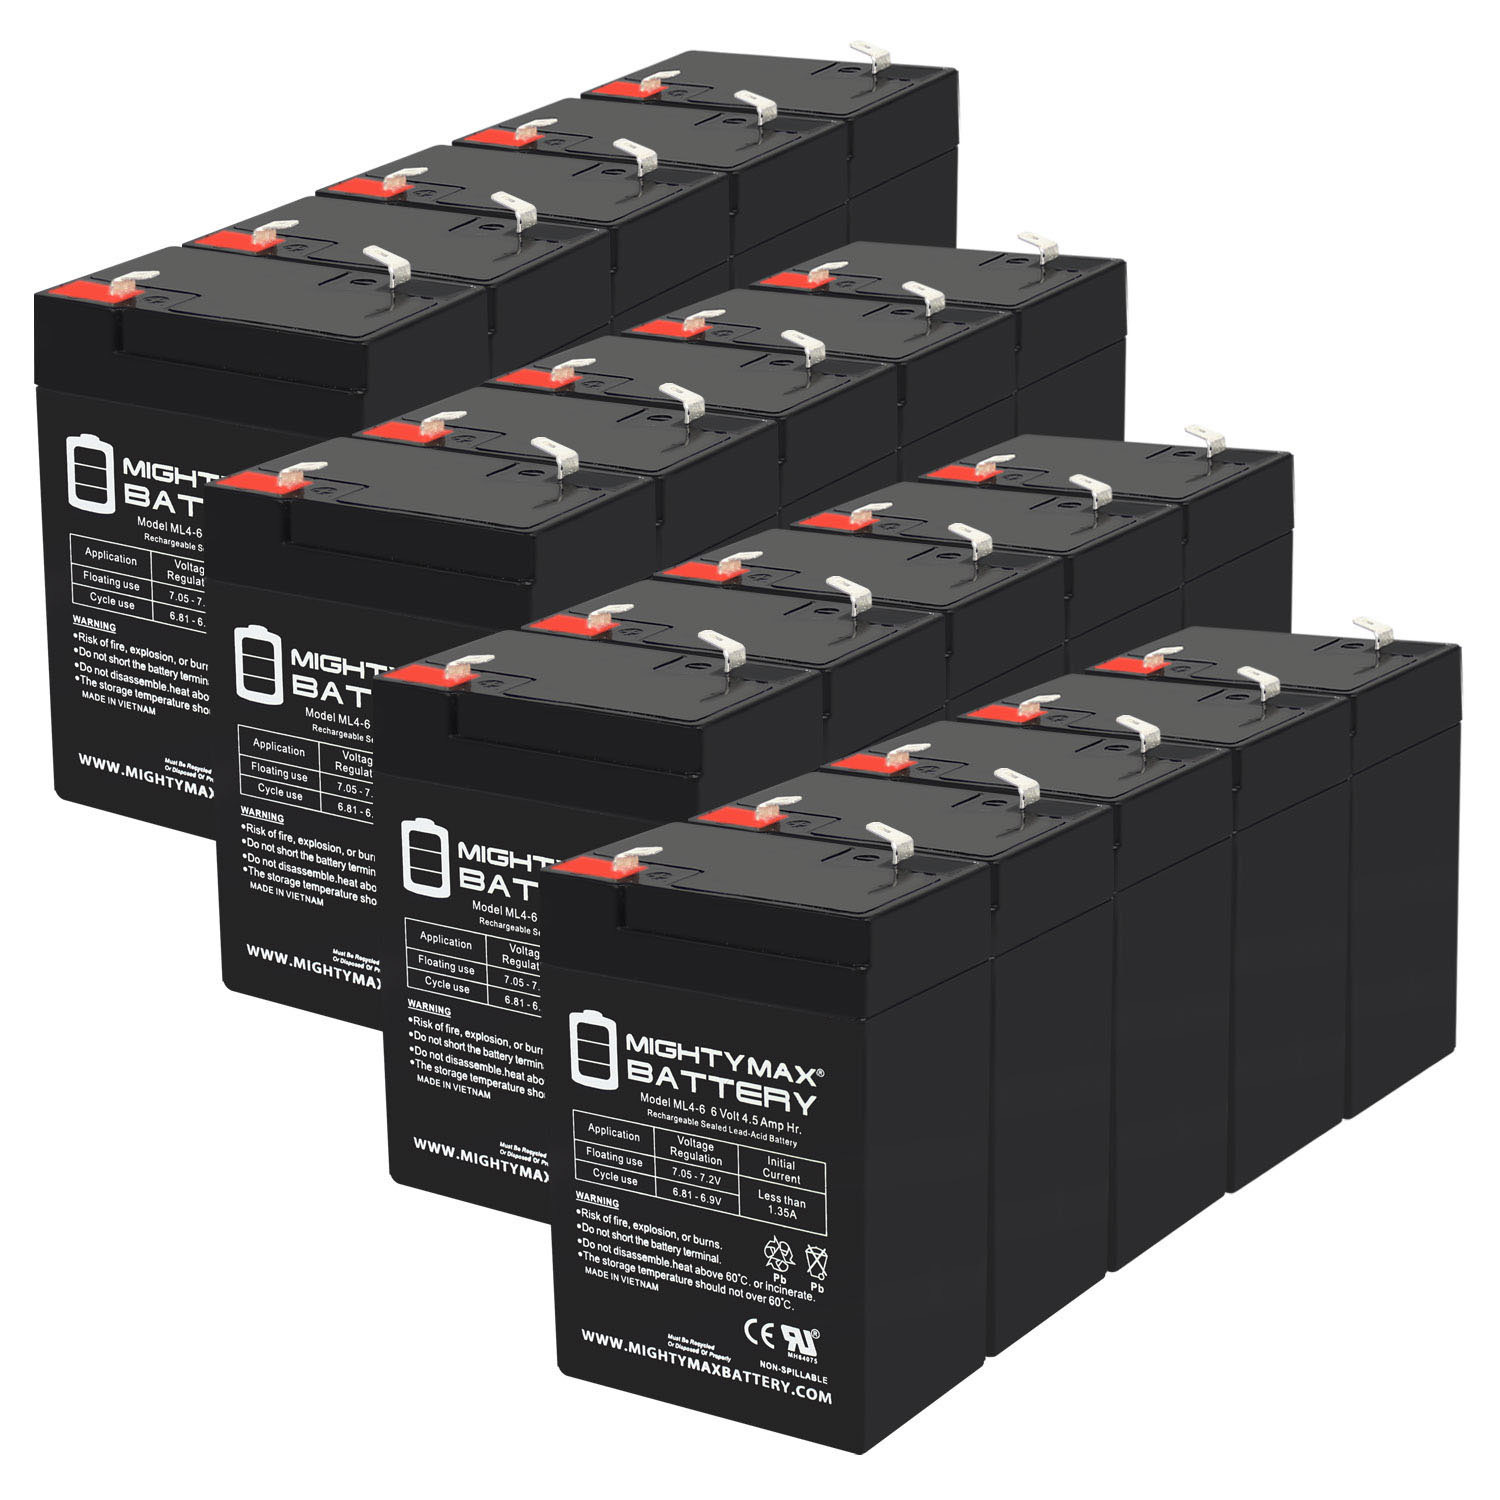 6V 4.5AH SLA Replacement Battery for Chloride 100-001-0224 - 20 Pack